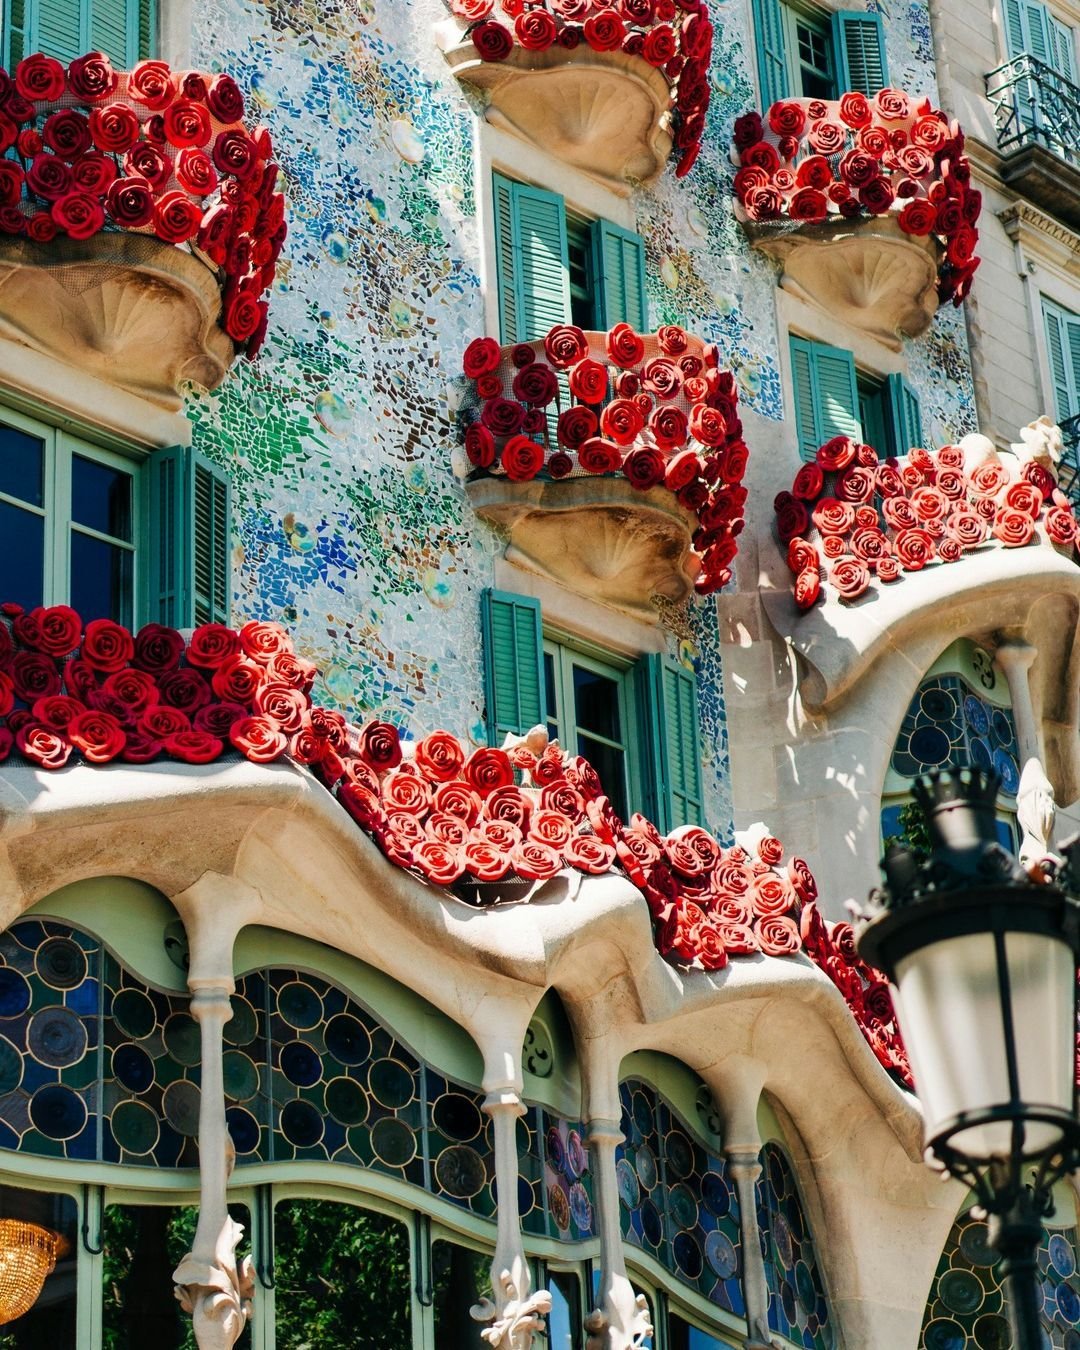 Spain offers a wealth of experiences for every traveler. Explore the architectural wonders of Antoni Gaudi, indulge in world-renowned cuisine, and immerse yourself in the vibrant culture of flamenco.

Whether you're drawn to the historic cities of Ma